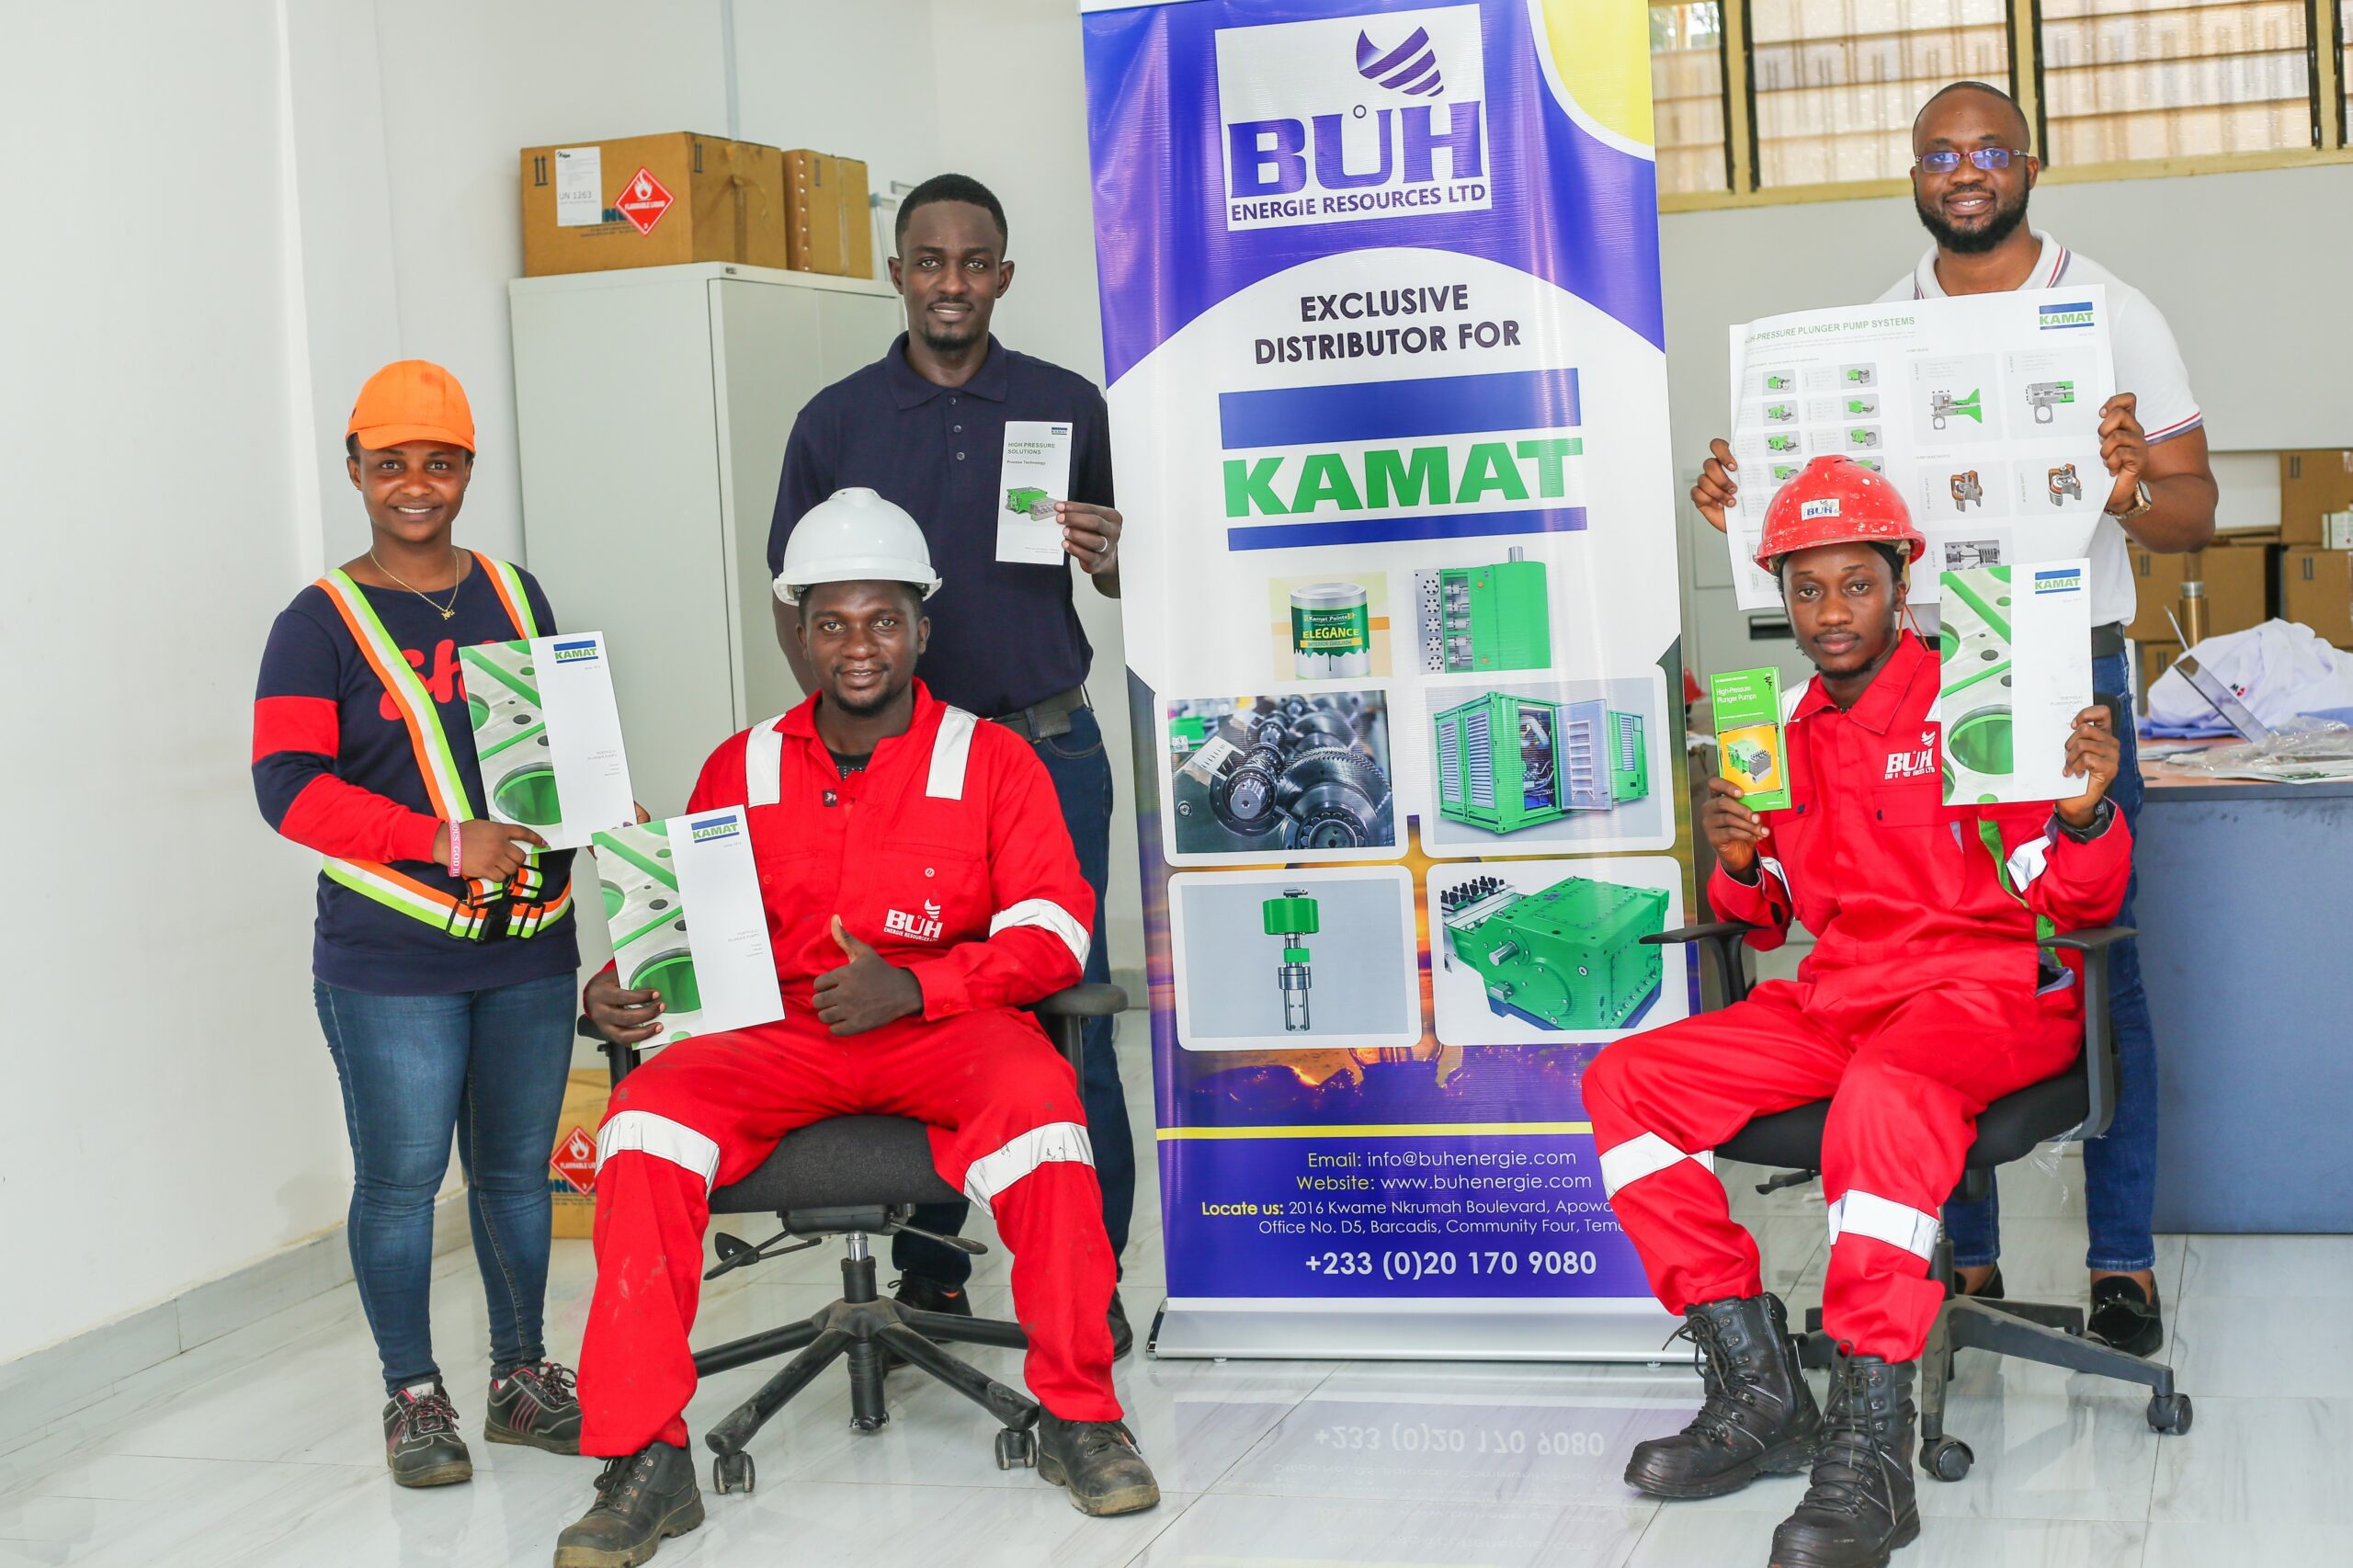 The BUH team proudly presenting KAMAT items and logo in their office in Ghana